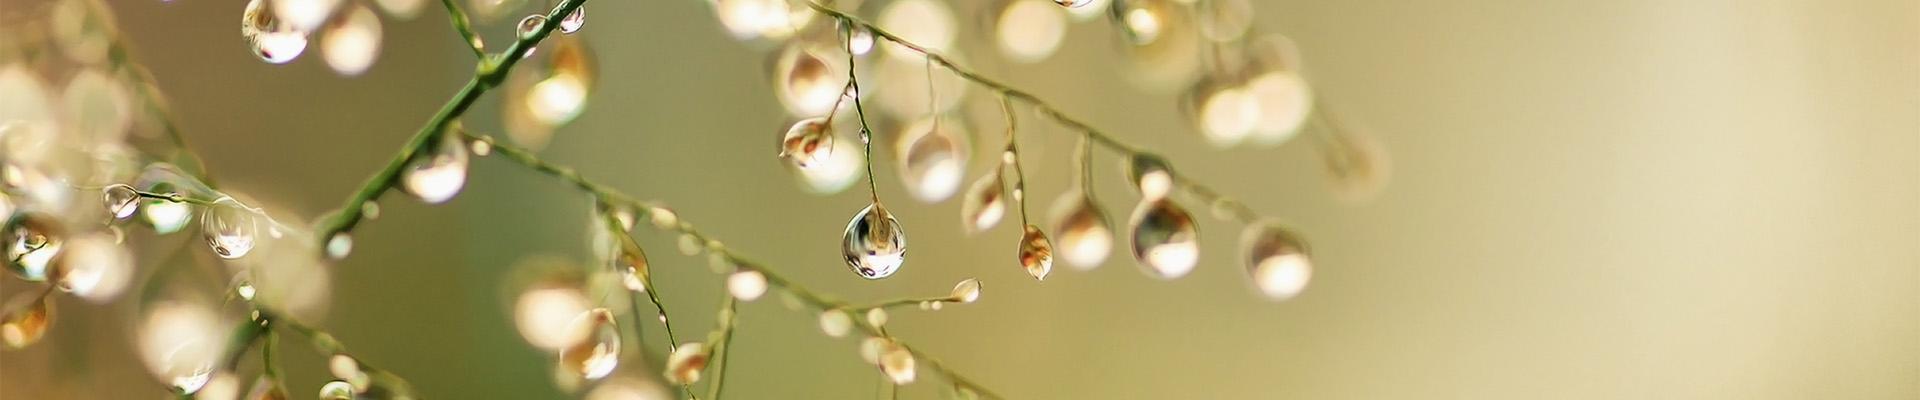 Water drops on tree branches